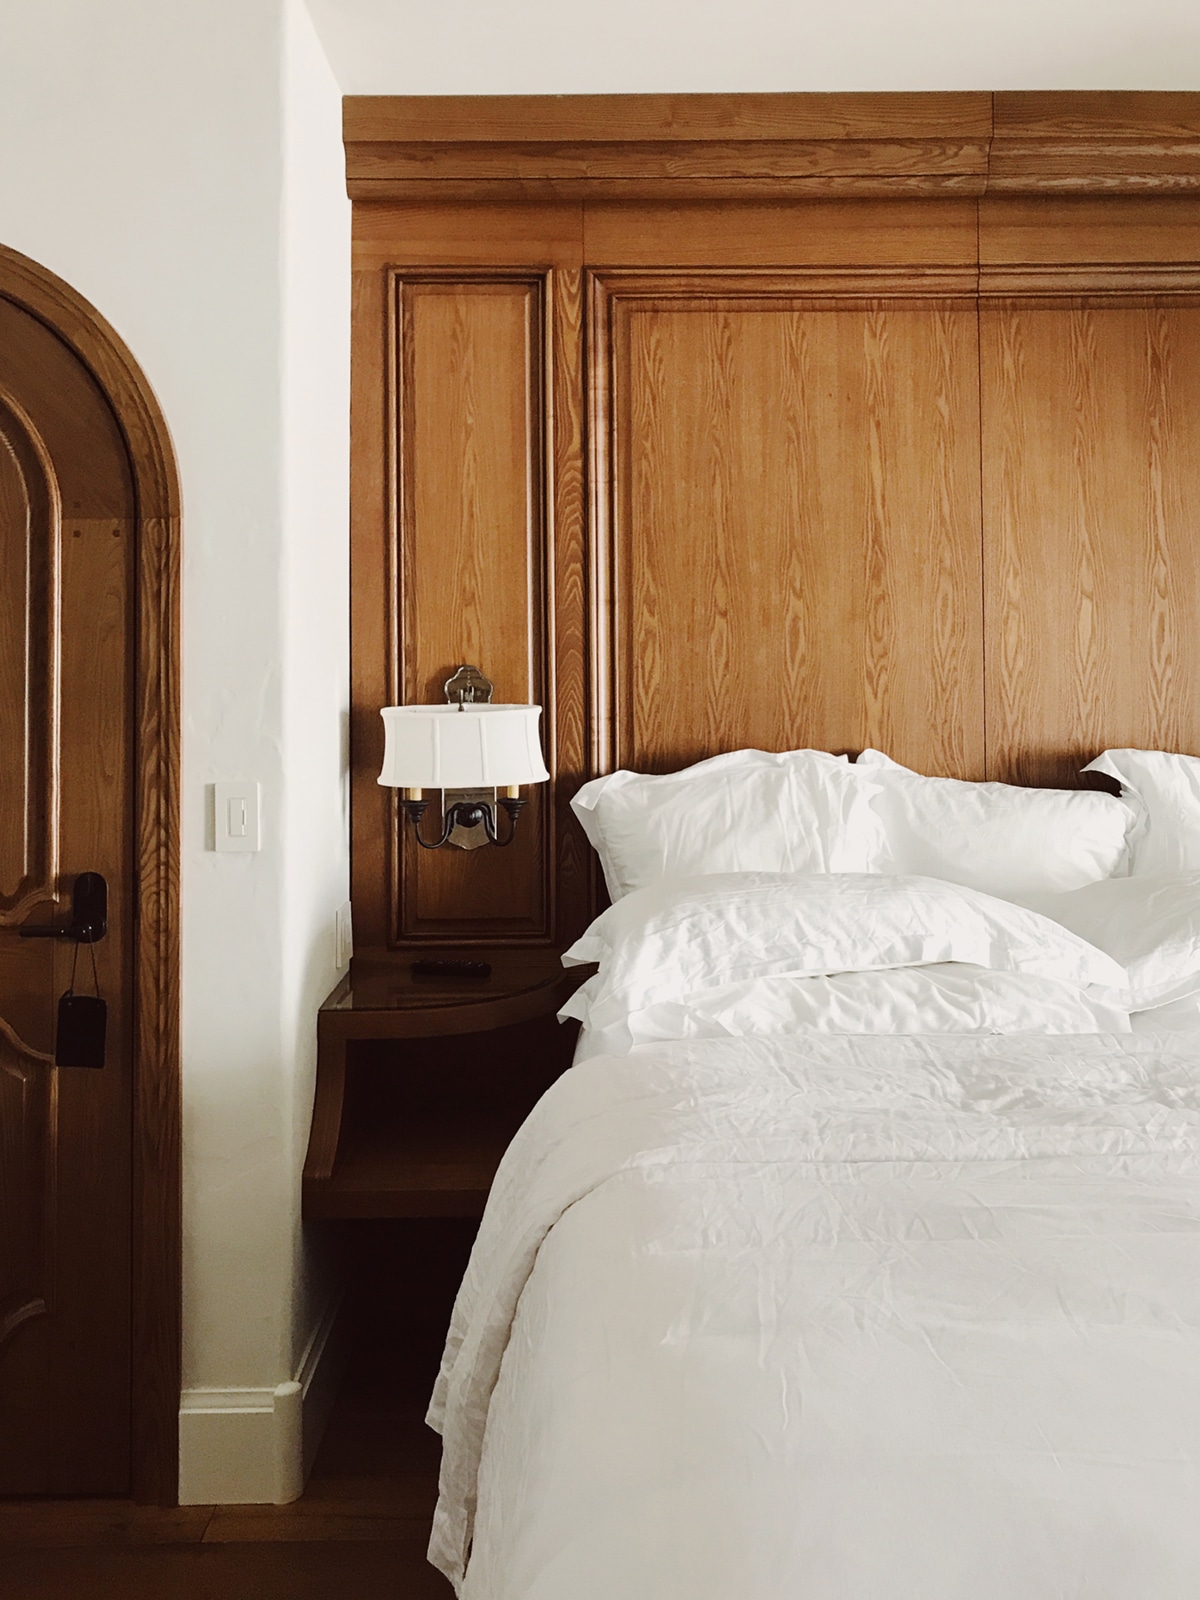 fluffy white bedding and wood built-in headboard at the posthotel in leavenworth | coco kelley